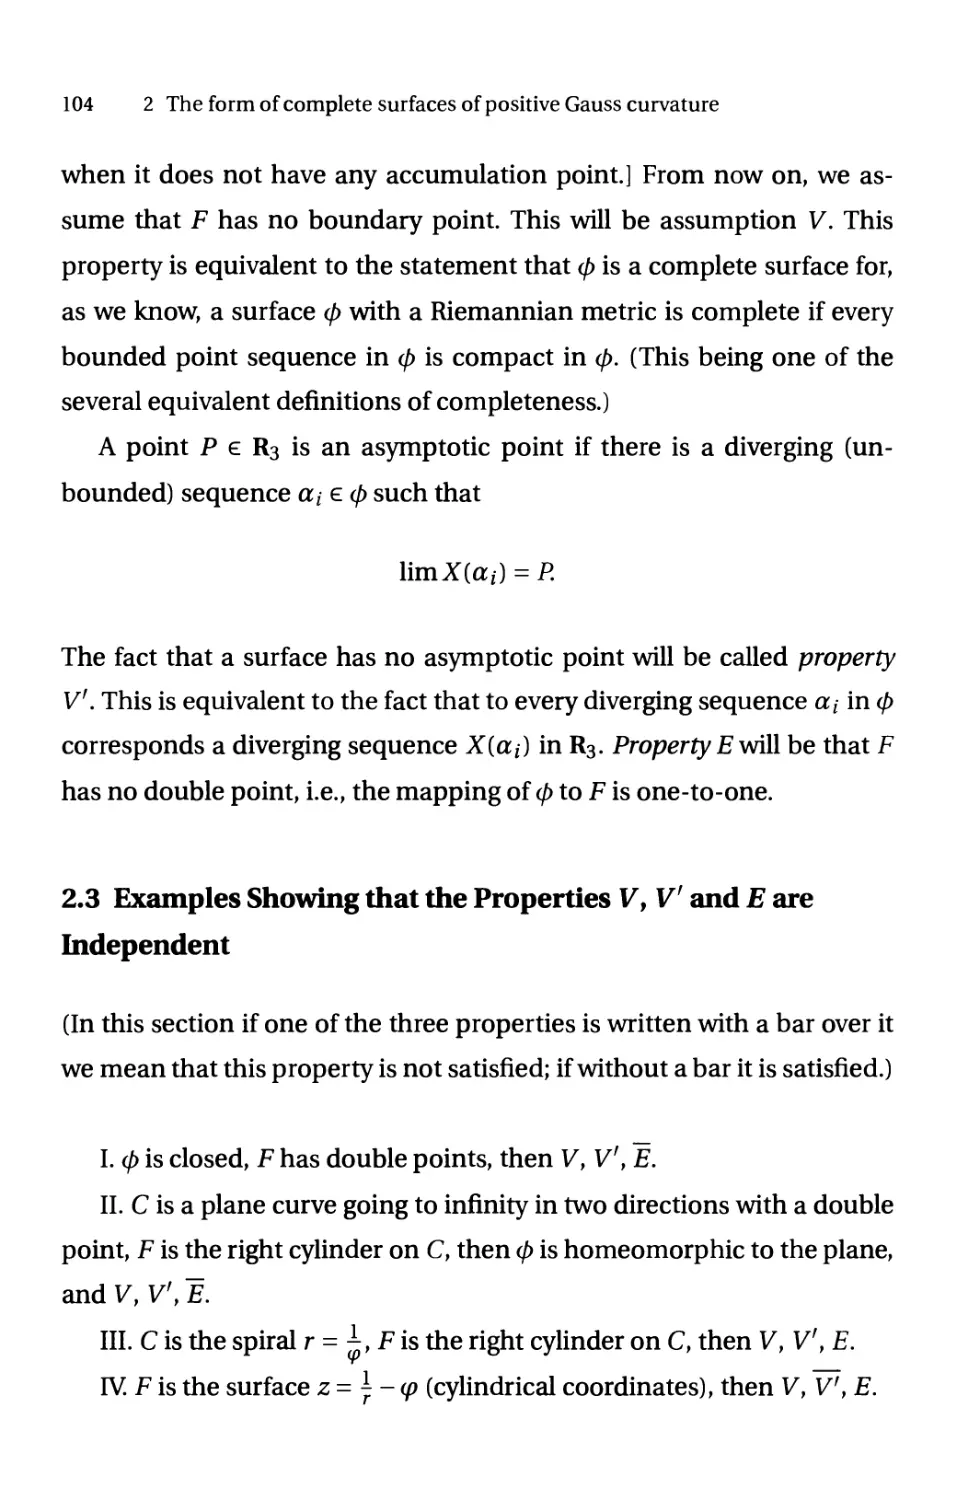 2.3 Examples Showing that the Properties V, V' and E are Independent